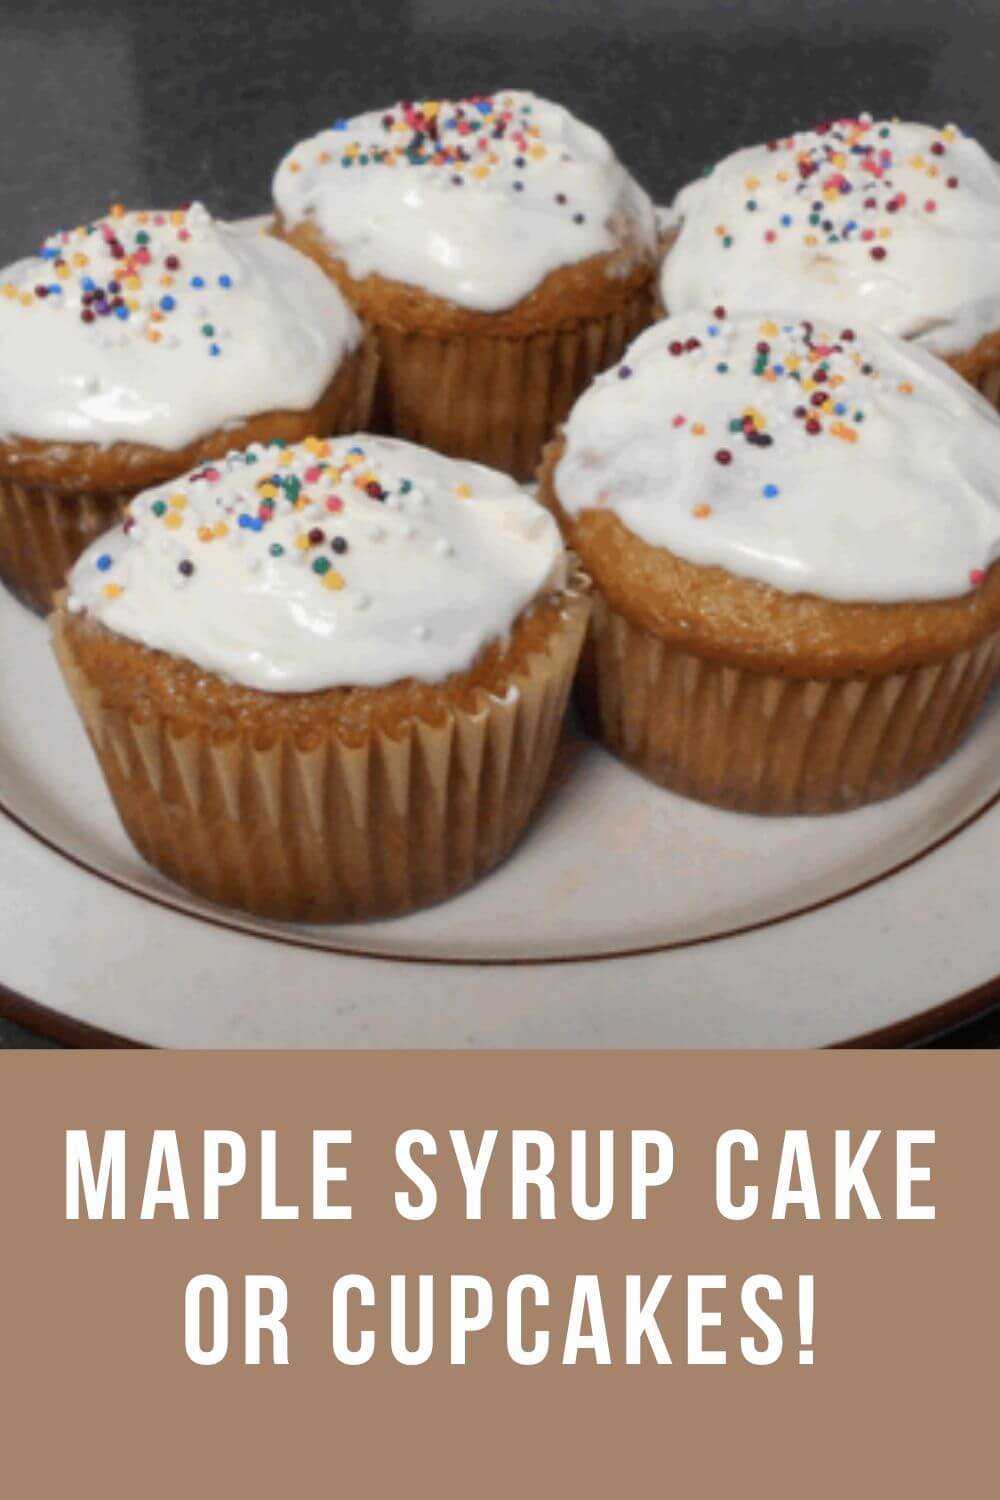 Maple Syrup Cake or Cupcakes